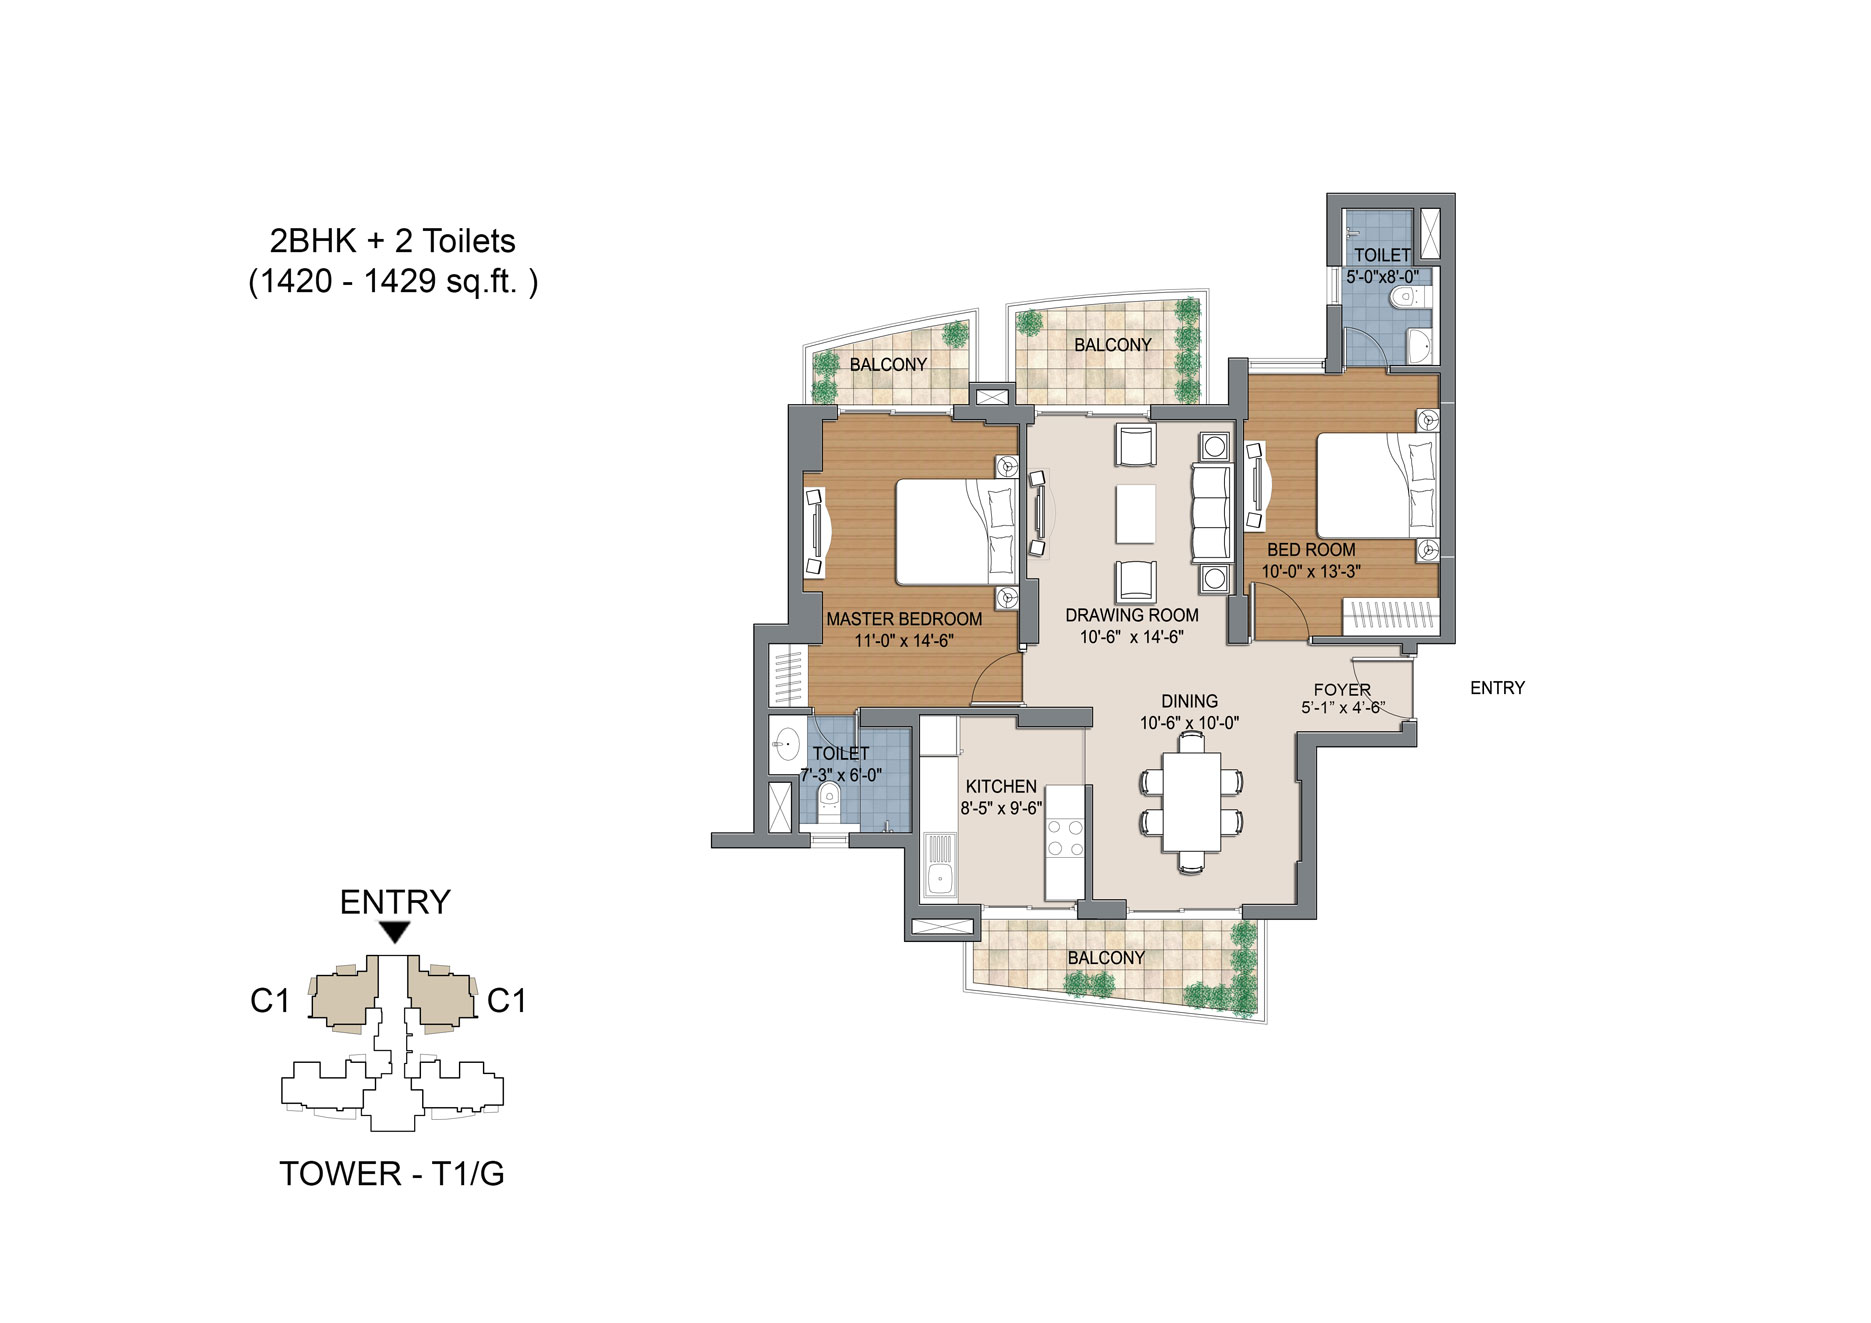 2BHK + 2 Toilets 1420-1429 sq.ft. Tower - T1/G 